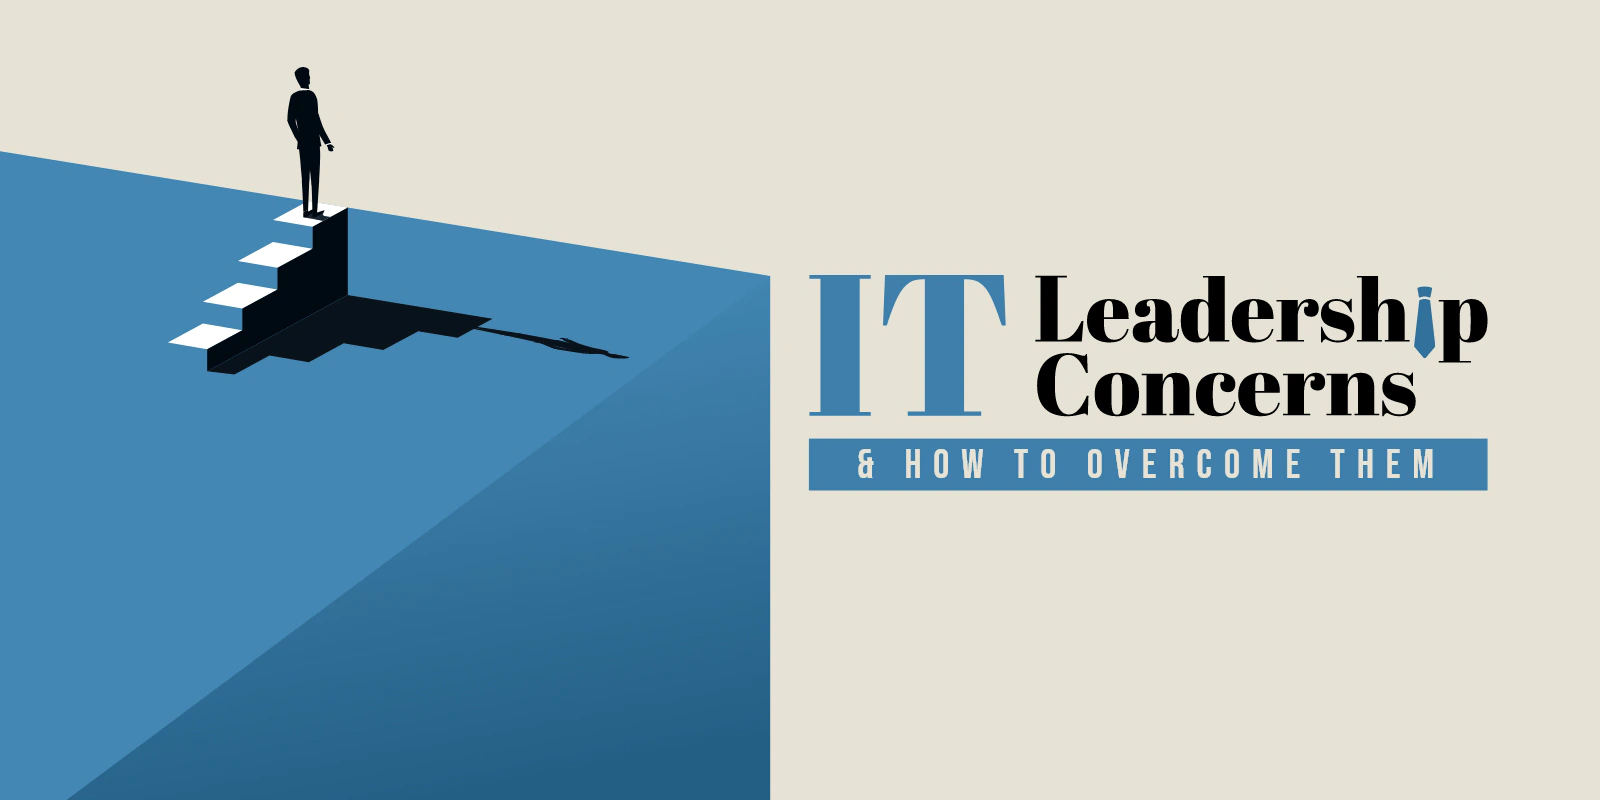 IT Leadership Concerns & How to Overcome Them